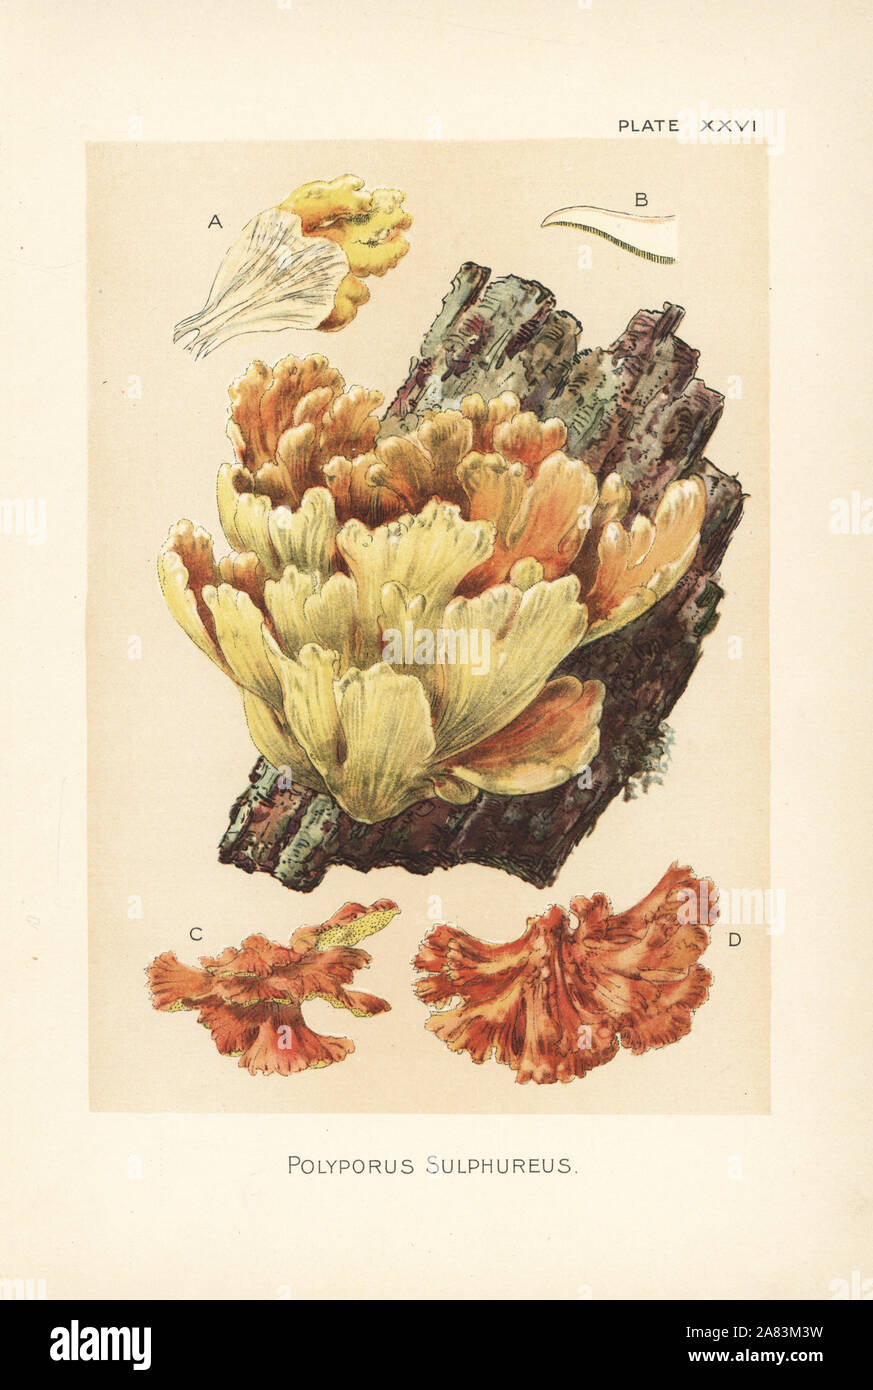 Crab-of-the-woods, Laetiporus sulphureus (Polyporus sulphureus). Chromolithograph after a botanical illustration by William Hamilton Gibson from his book Our Edible Toadstools and Mushrooms, Harper, New York, 1895. Stock Photo